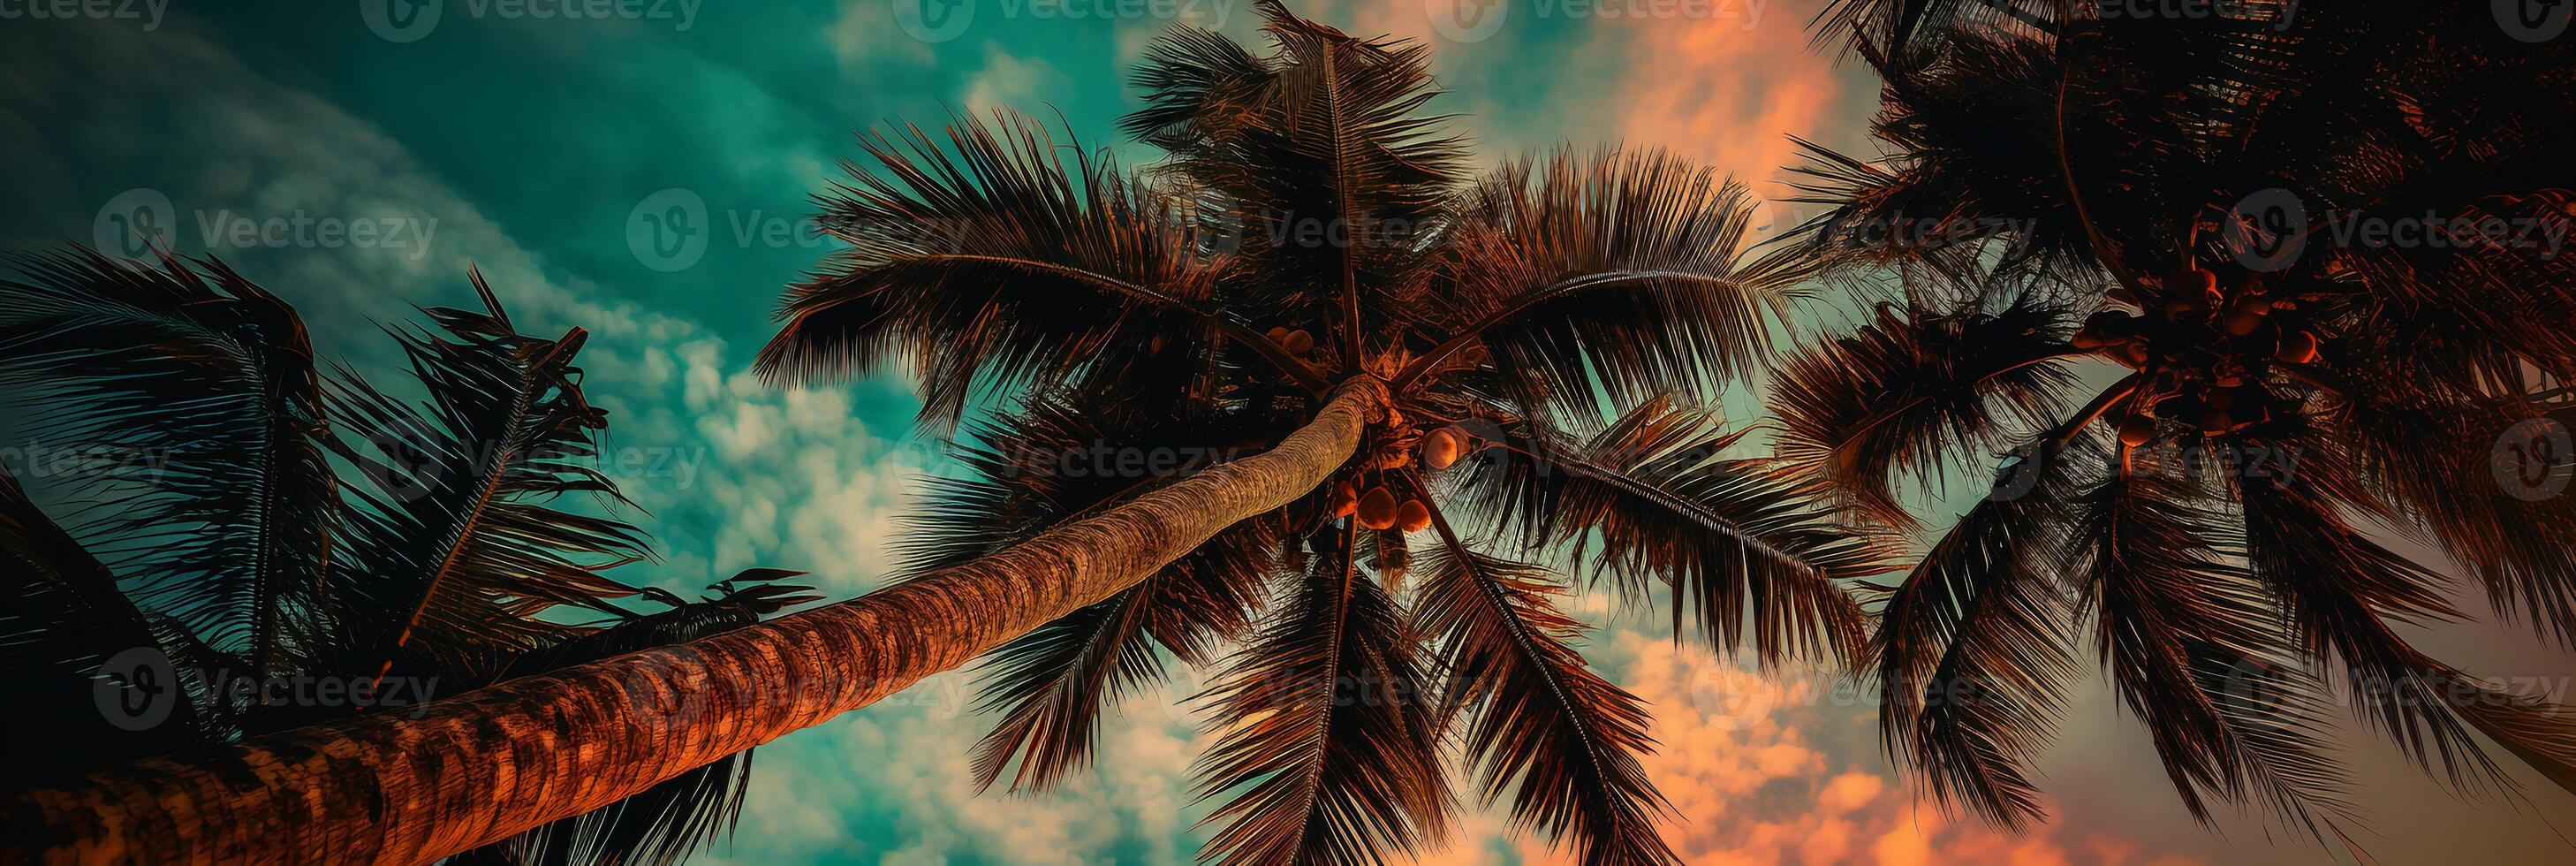 majestic palm tree with its lush green leaves gently swaying in the breeze. photo